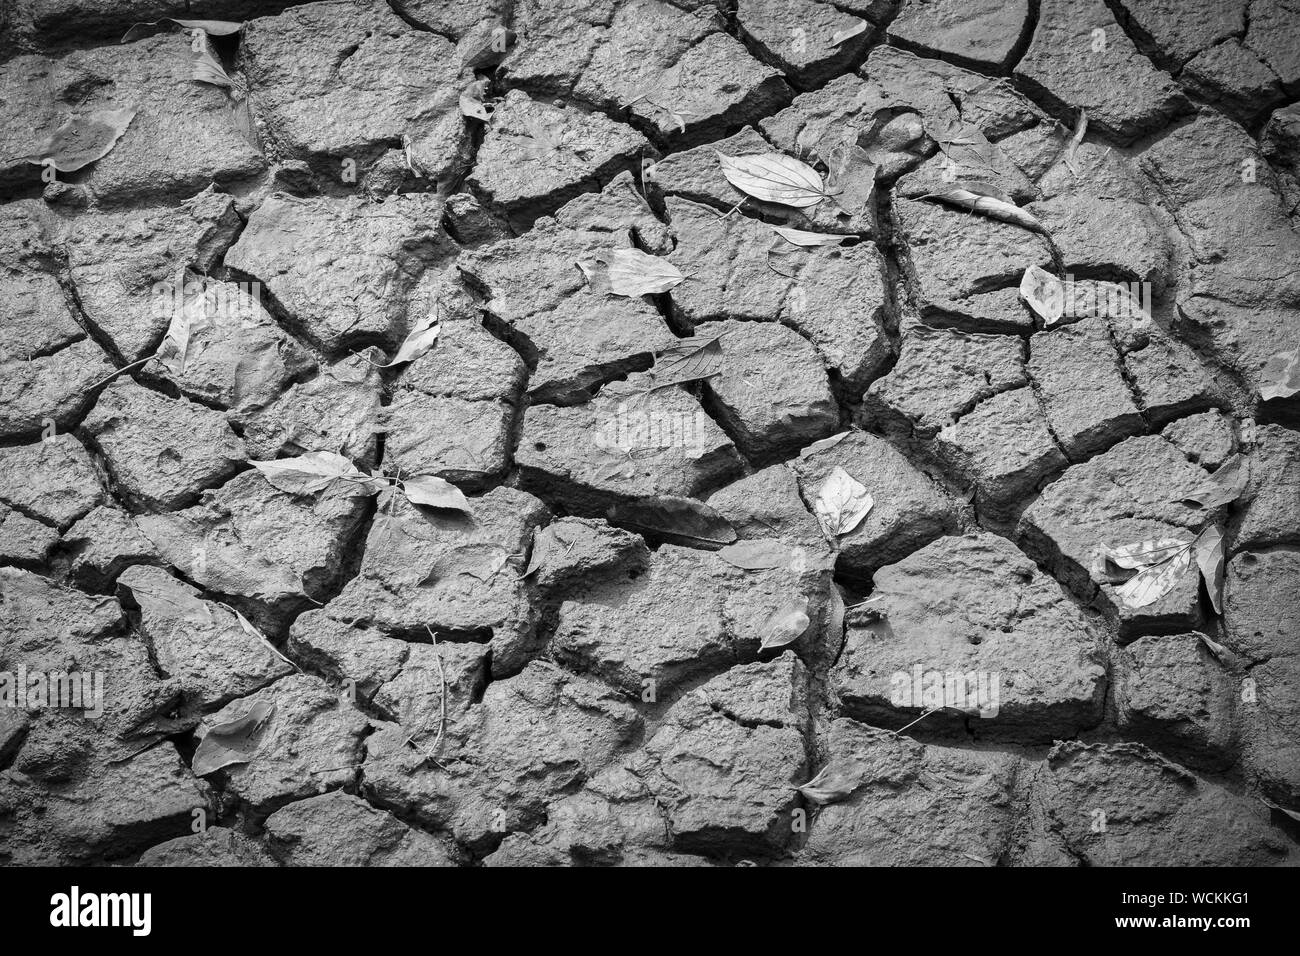 Arid and dry cracked earth in forest soil with dry leaves. Stock Photo